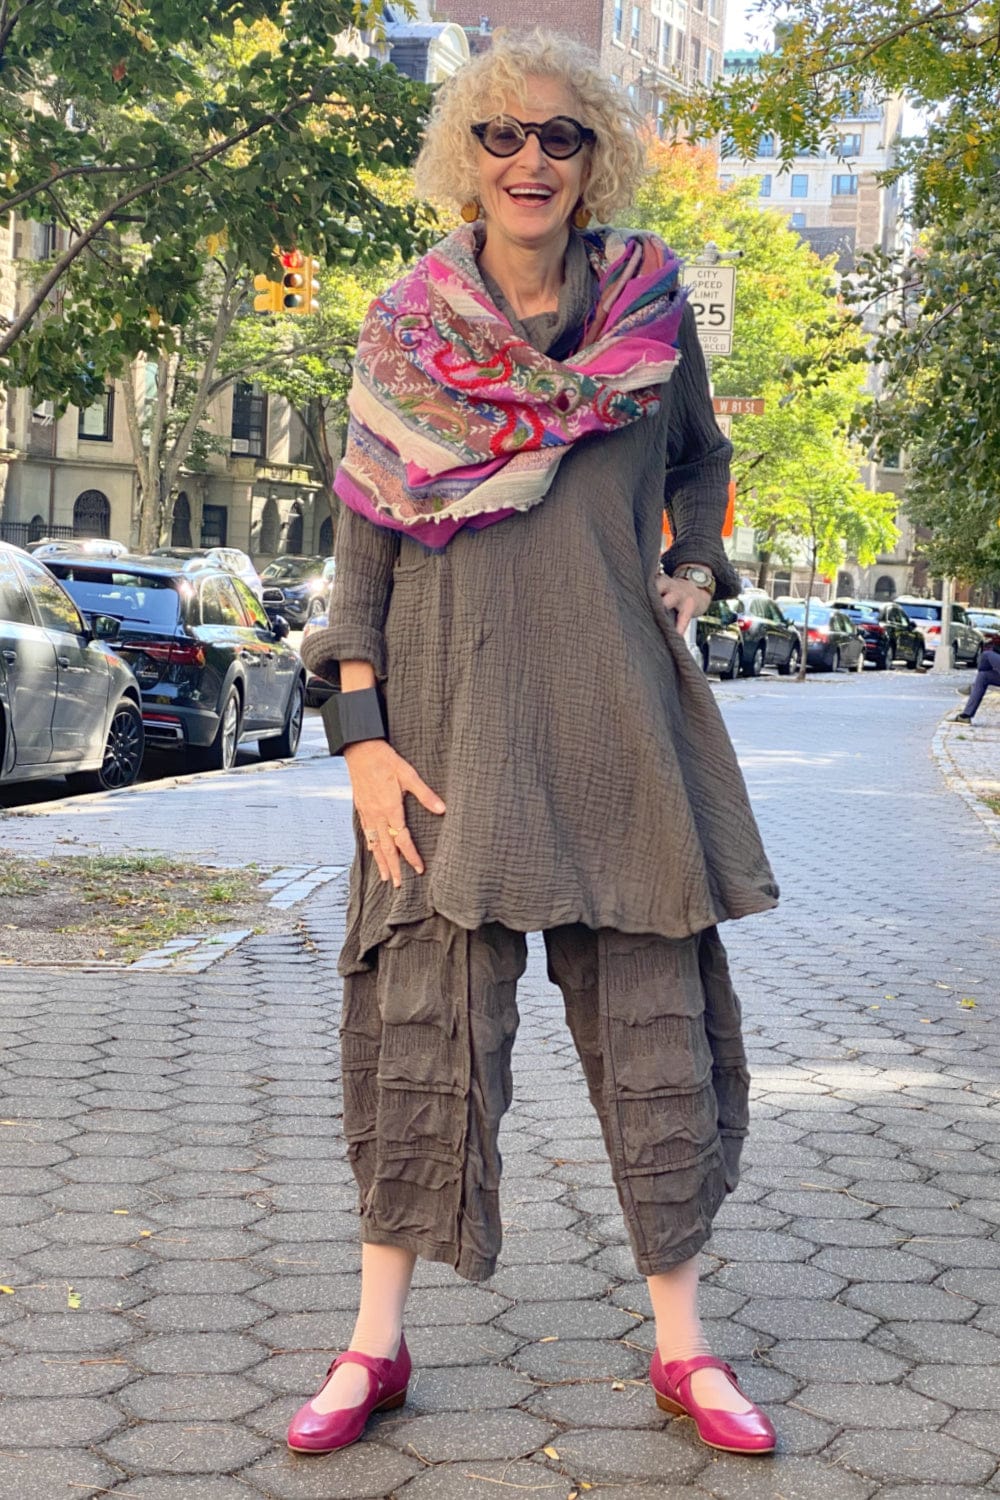 Cotton Cowl tunic styled with textured grey full leg pant and fushcia wool scarf. The model is older and standing on a NYC street.